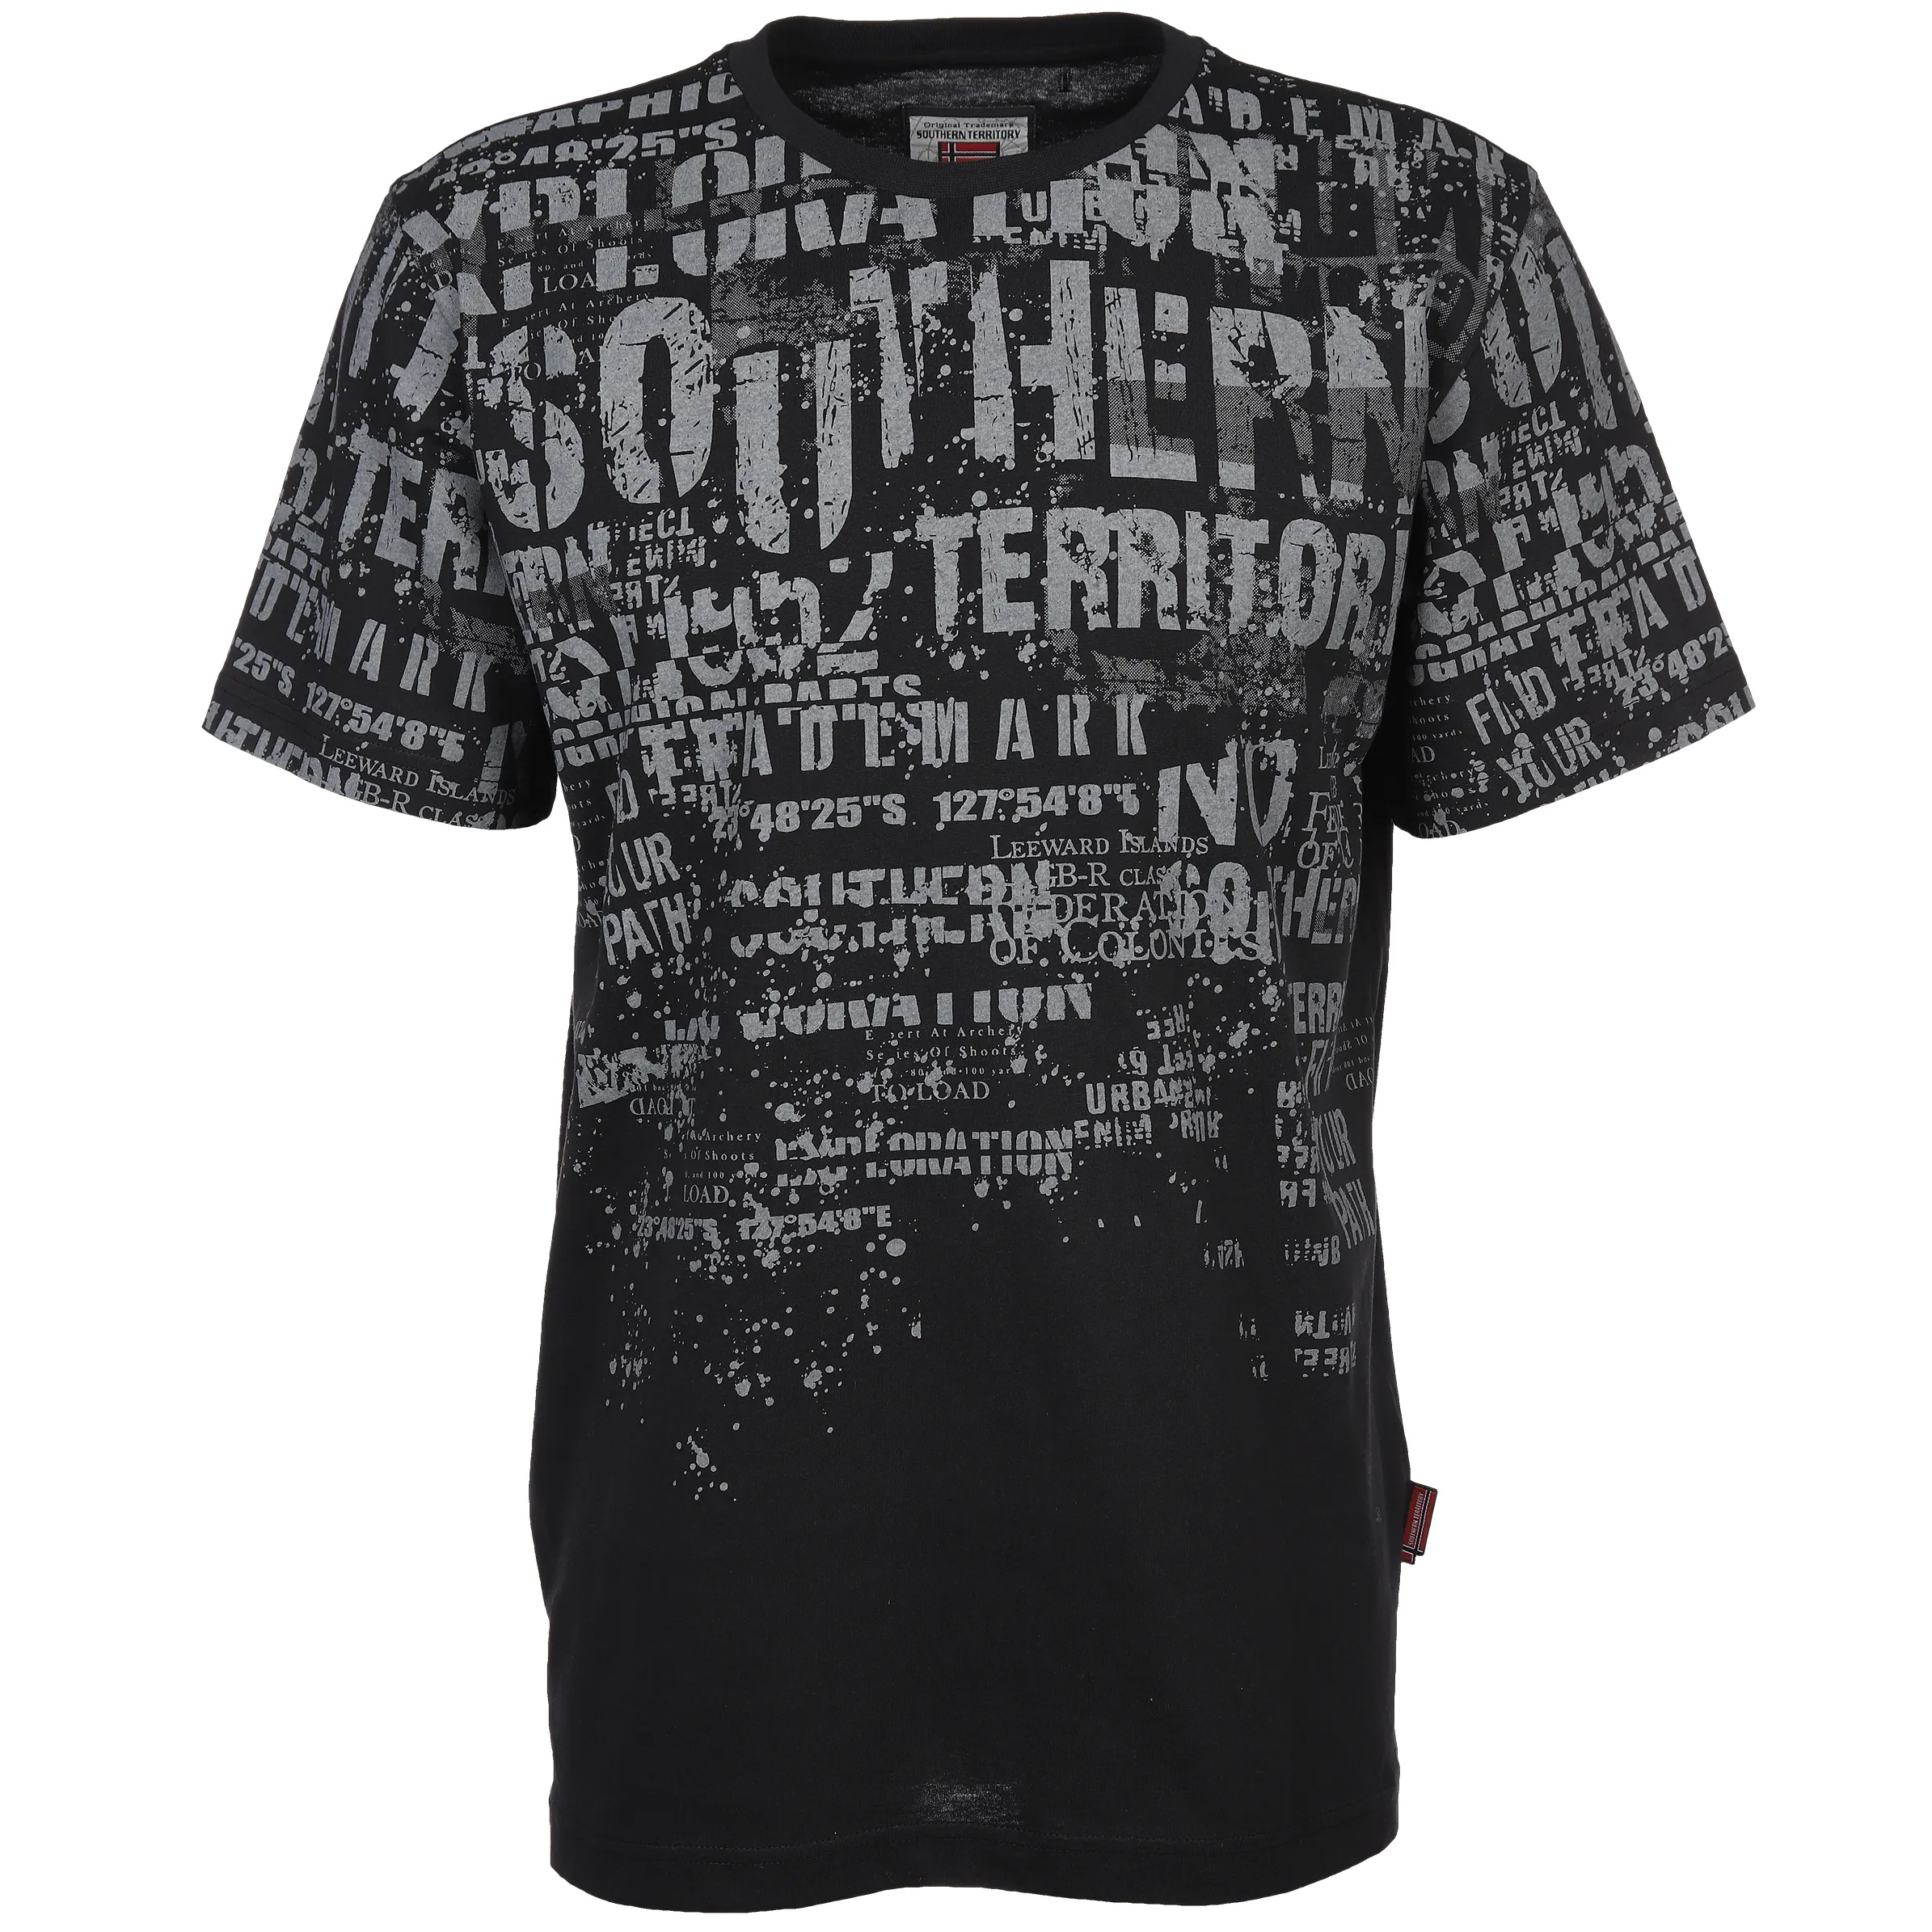 Southern Territory He. T-Shirt 1/2 Arm allover washer Schwarz 885861 BLACK 1